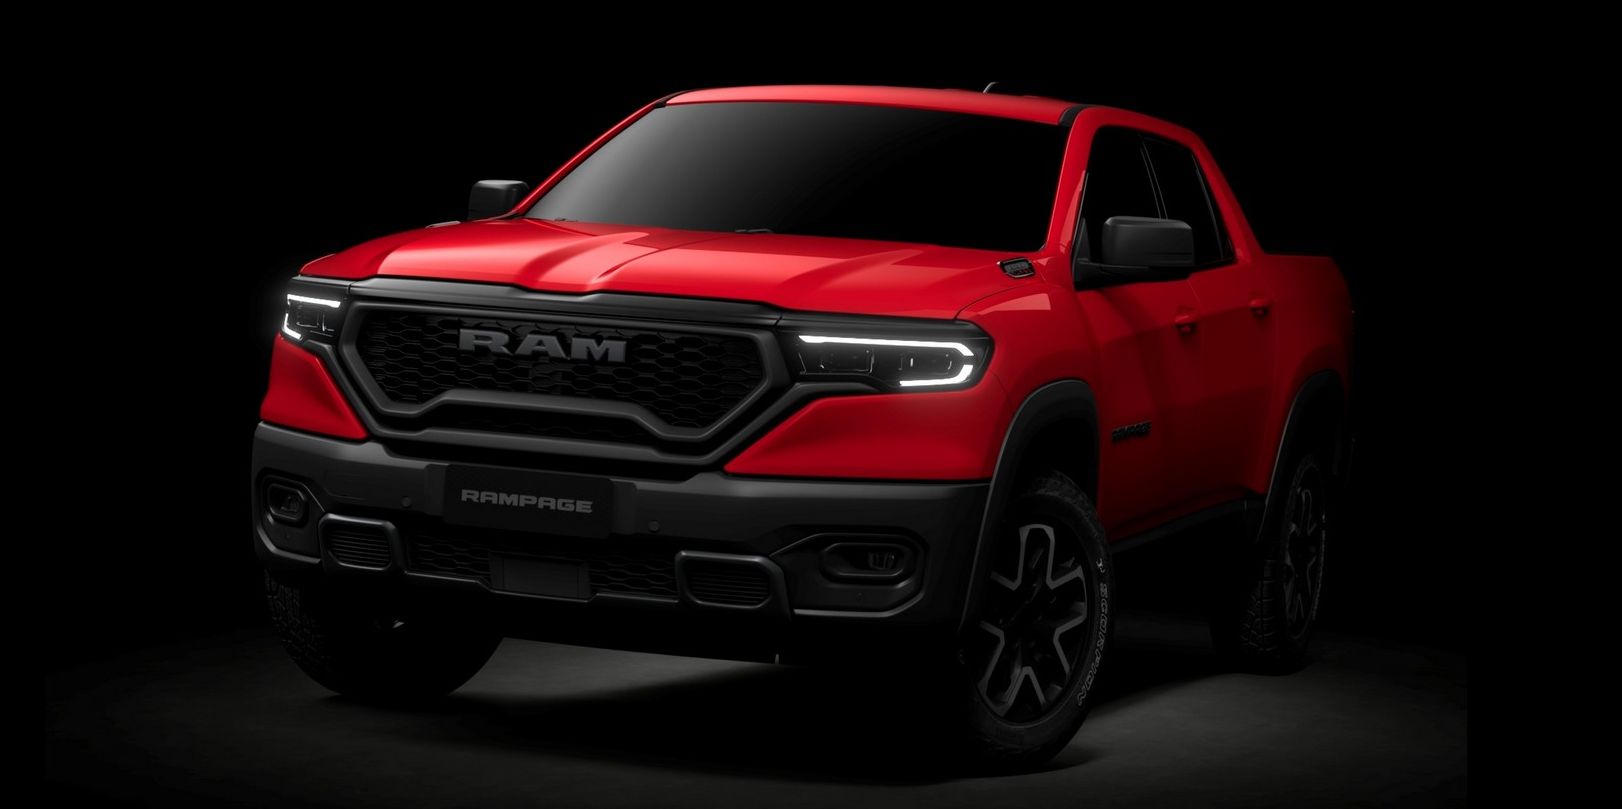 Ram's New Midsize Pickup Will Be Called Rampage